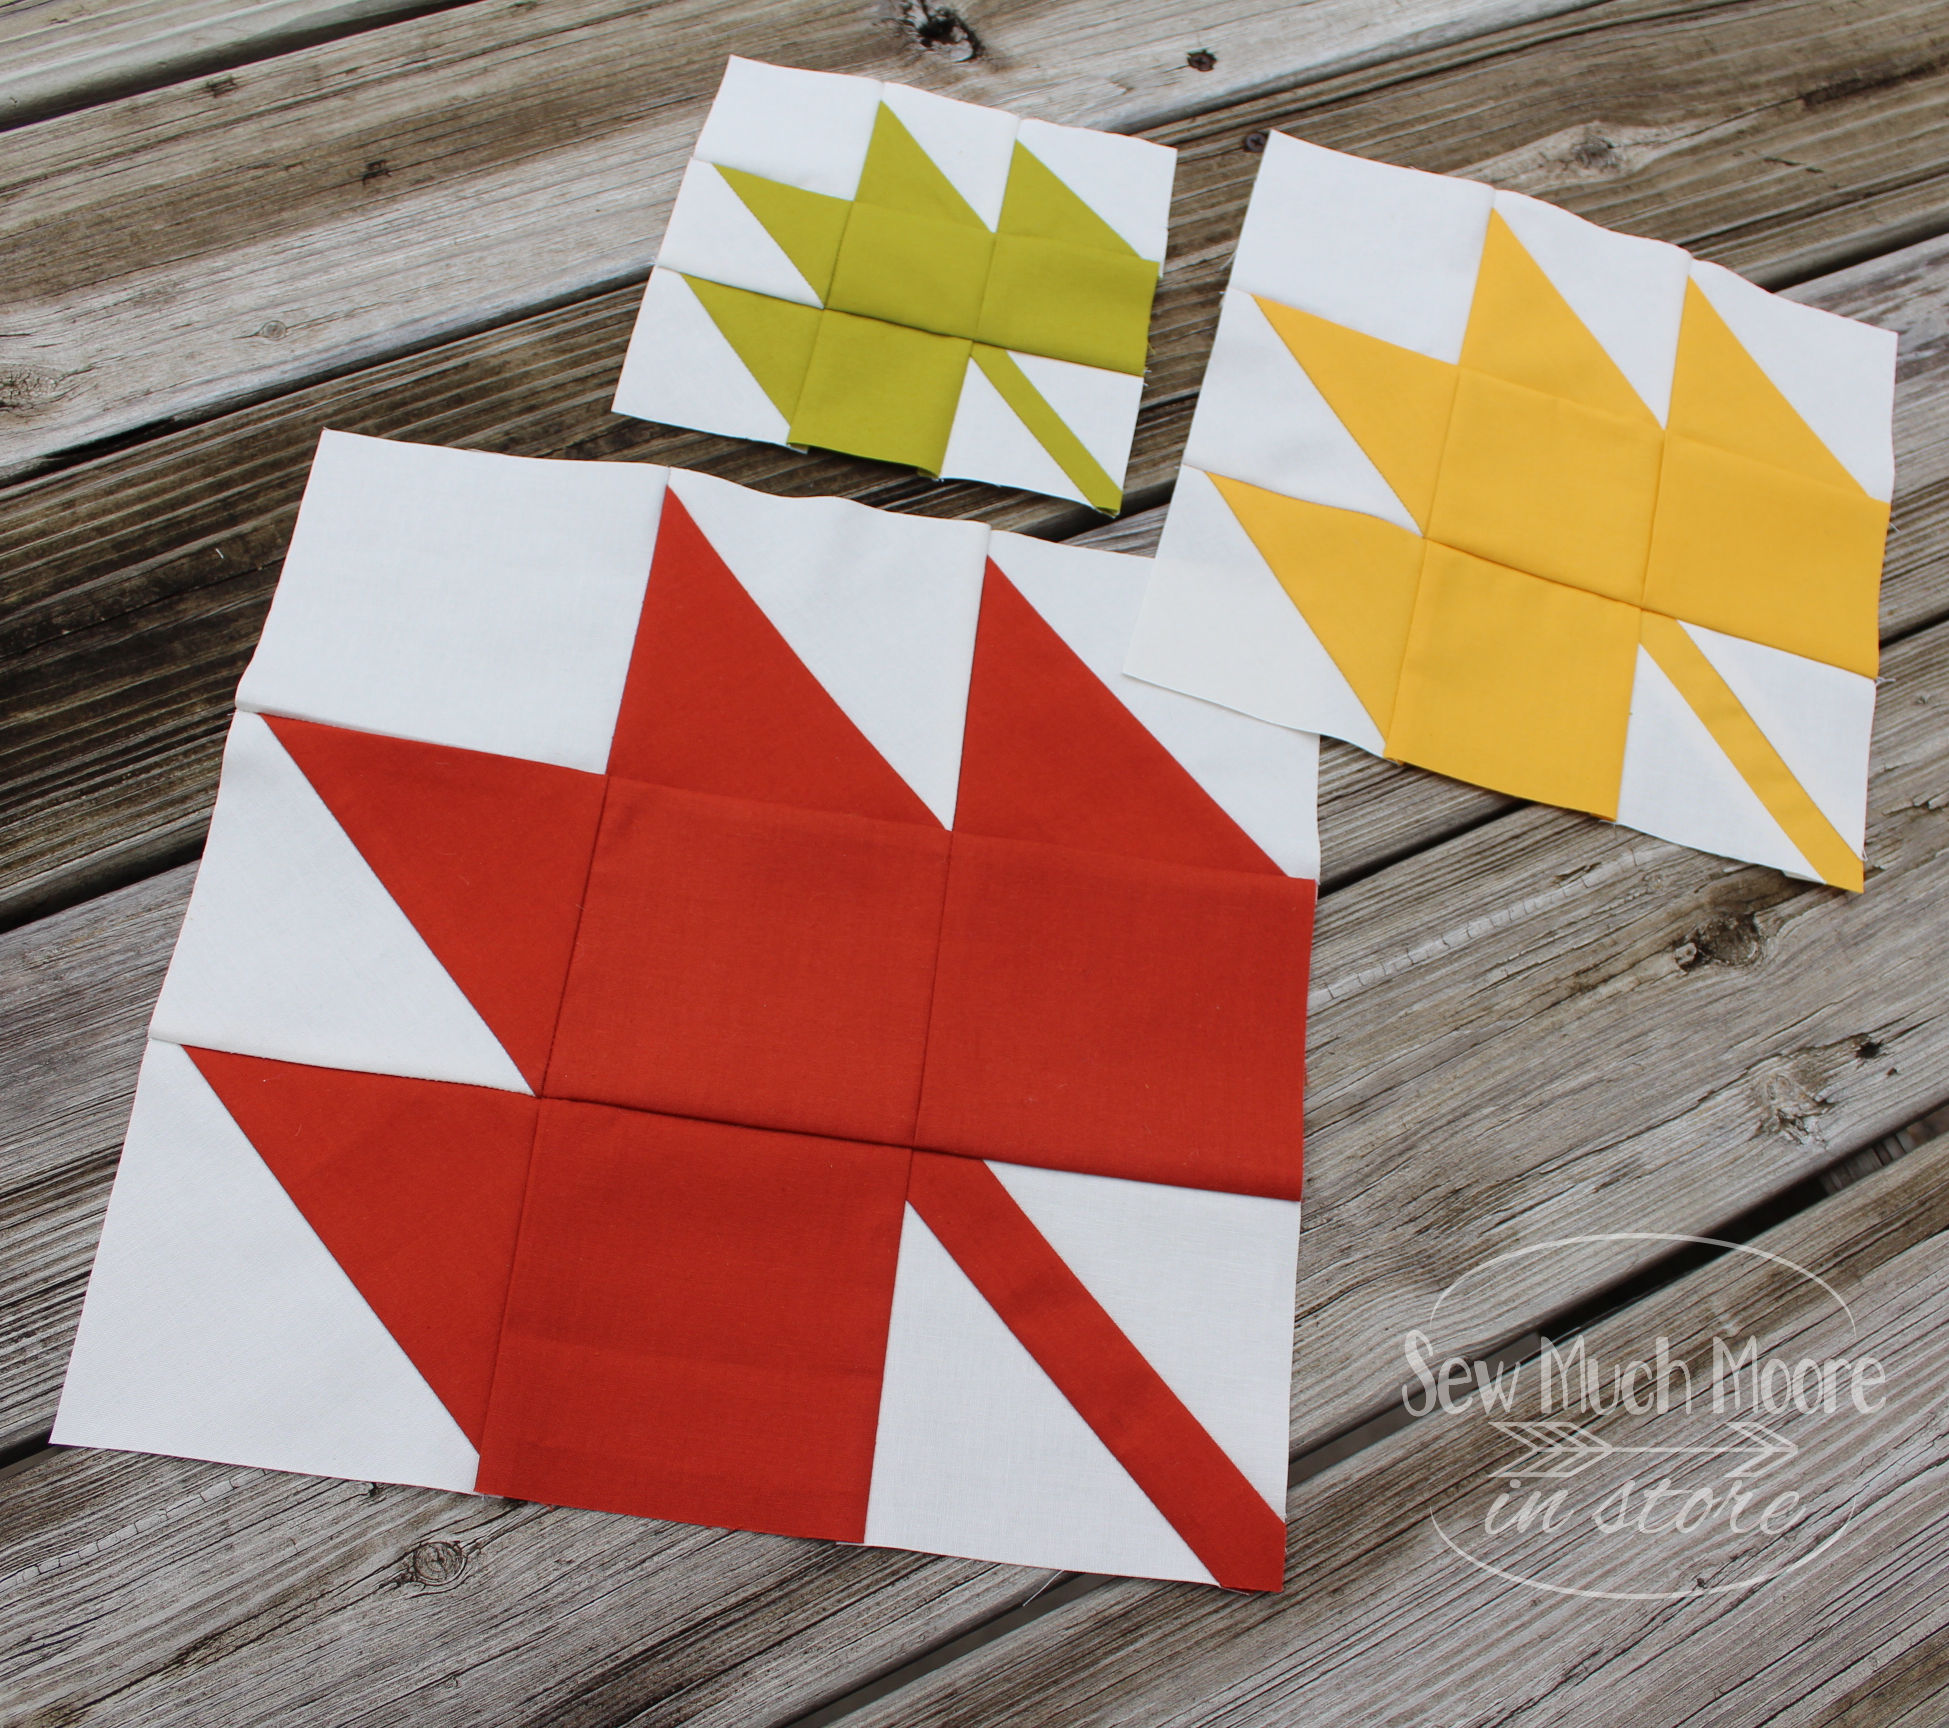 This nine-patch quilt block is super easy and looks really great! There are many ways to make a Maple Leaf Quilt Block. Let me show you how I made this version. Watch my video tutorial and get your free pattern to make a variety of sizes! #MapleLeaf #FallQuilt #FreePattern #VideoTutorial #Quilt #SewMuchMooreInStore #SewMuchMoore